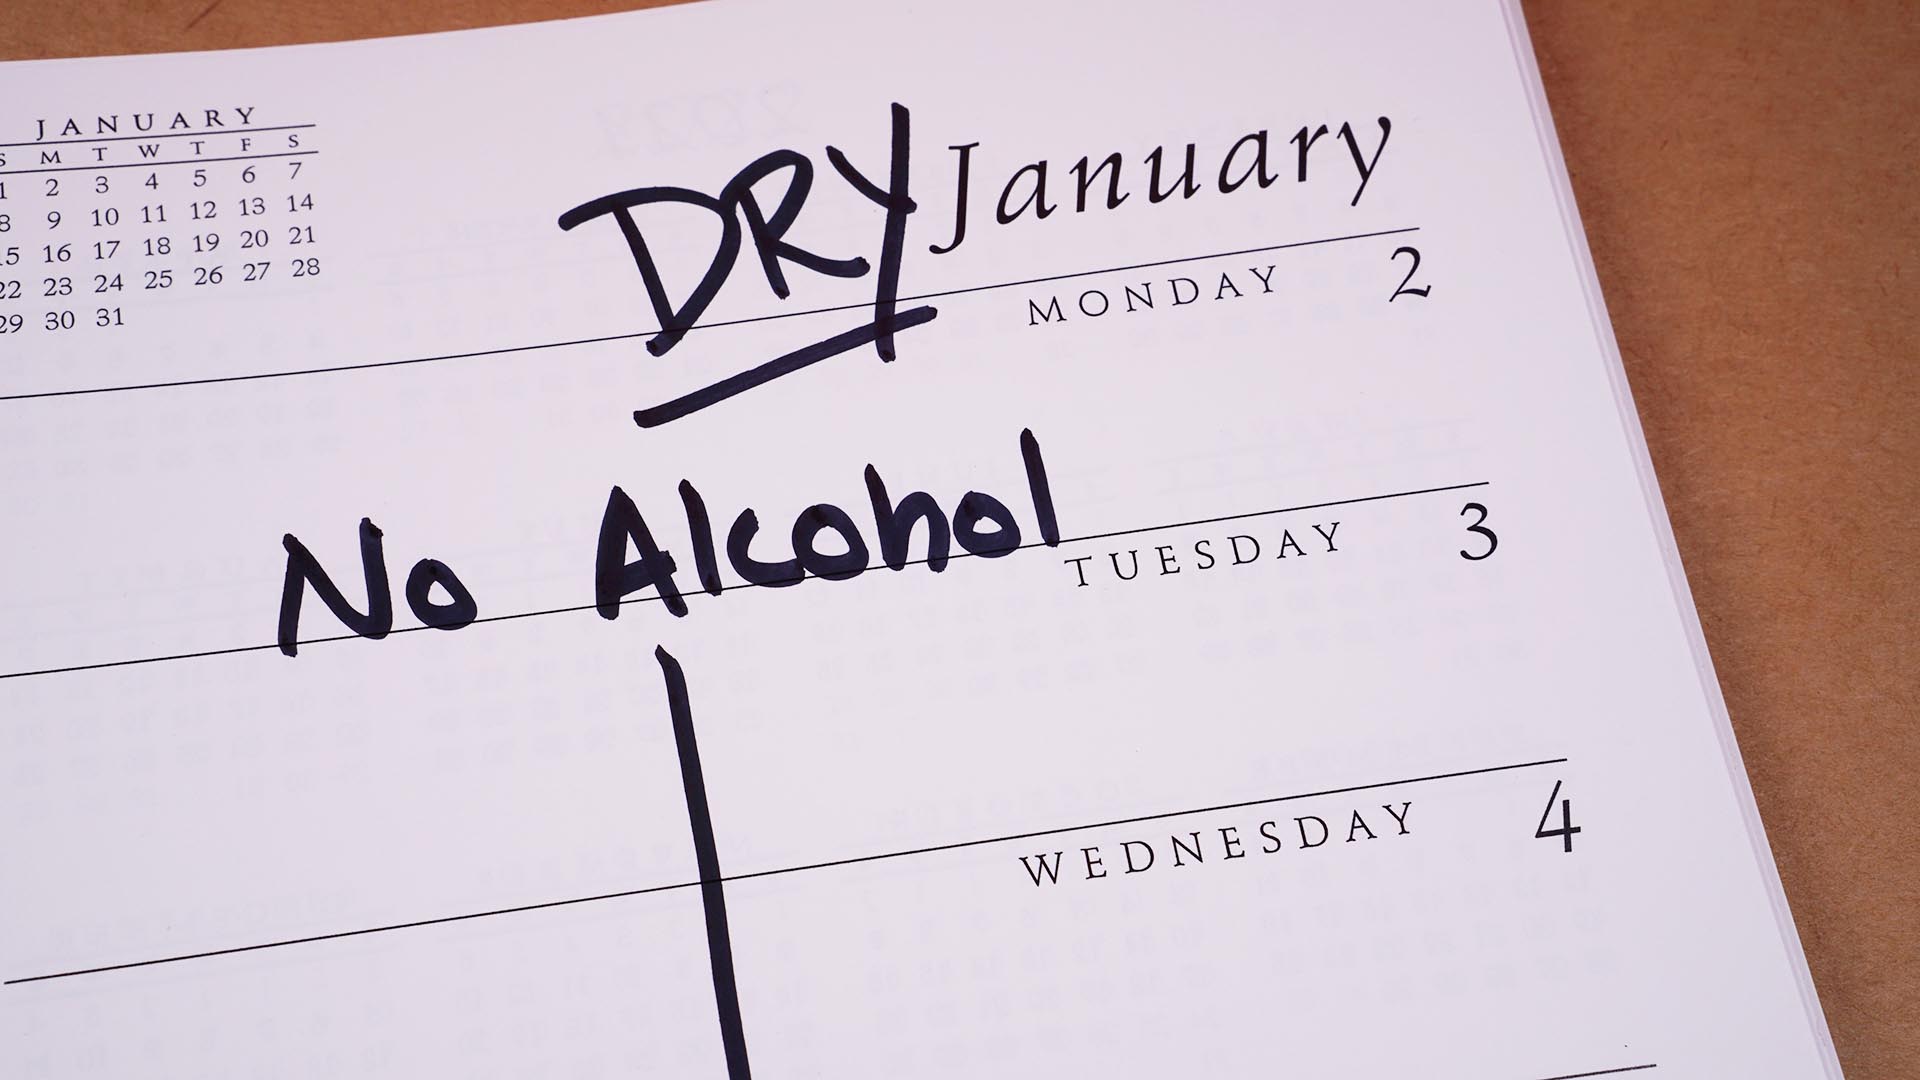 7 reasons to consider taking part in Dry January